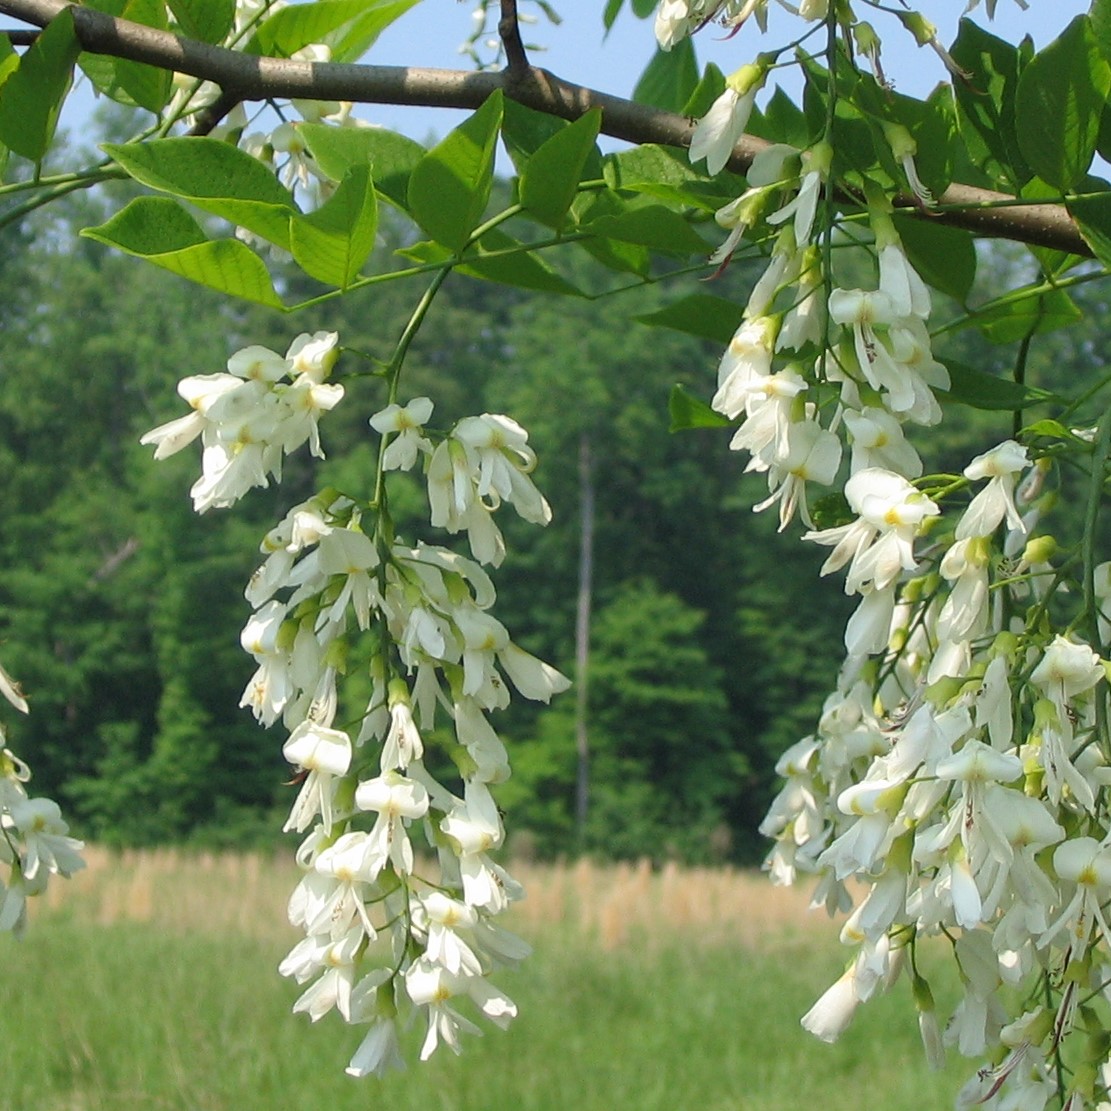 The Scientific Name is Cladrastis kentukea [= Cladrastis lutea]. You will likely hear them called Yellow-wood, Yellowwood, American Yellowwood. This picture shows the Flowers are fragrant and in pendulous clusters of Cladrastis kentukea [= Cladrastis lutea]